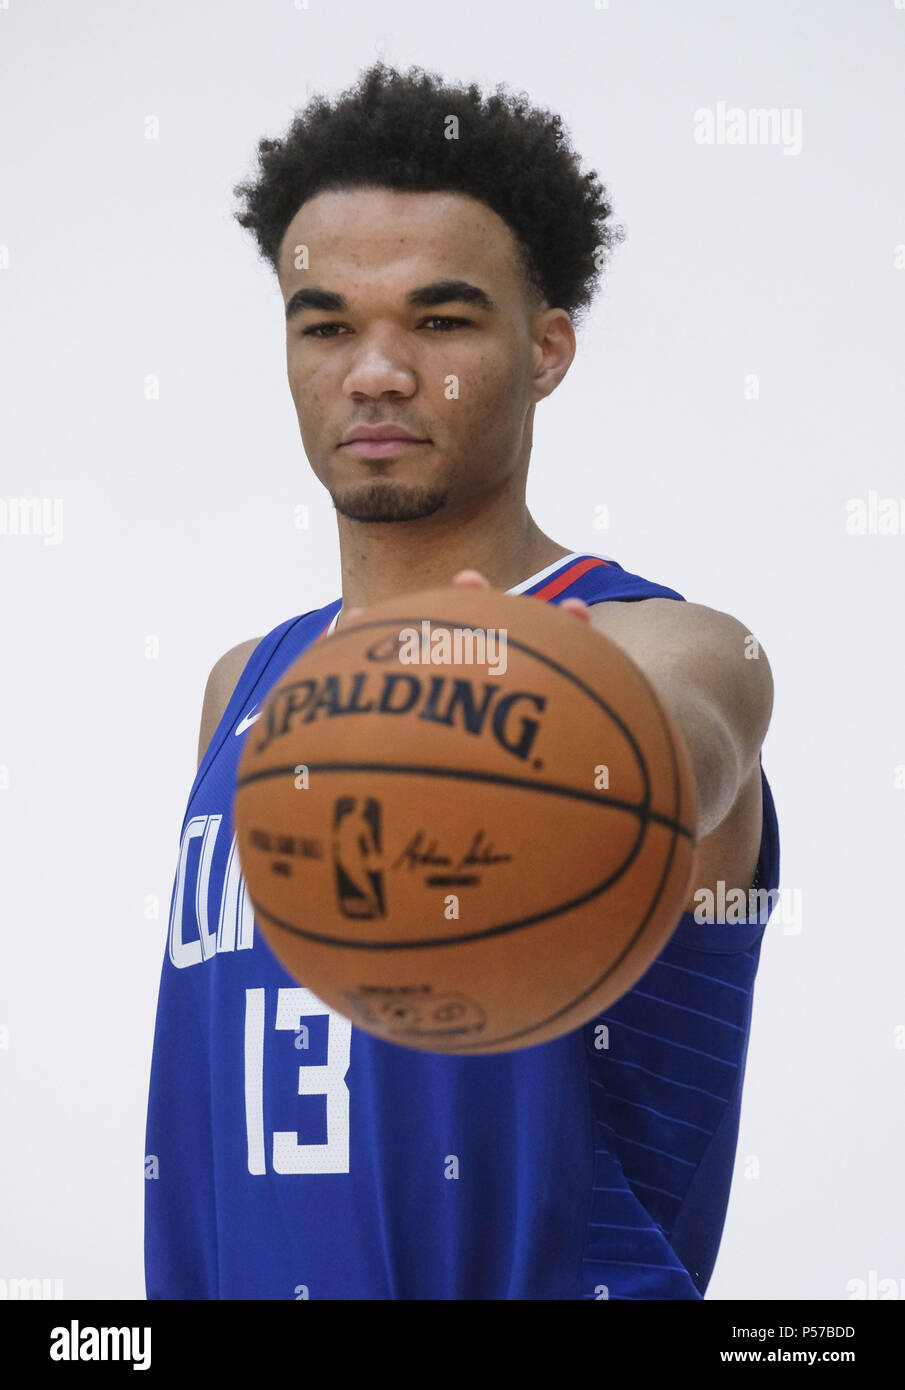 Los Angeles, California, USA. 25th June, 2018. Los Angeles Clippers rookie guard Jerome Robinson poses for photos after being introduced during a news conference in Los Angeles, Monday, June 25, 2018. Robinson, who played at Boston College, was drafted 13th by the Clippers. Credit: Ringo Chiu/ZUMA Wire/Alamy Live News Stock Photo